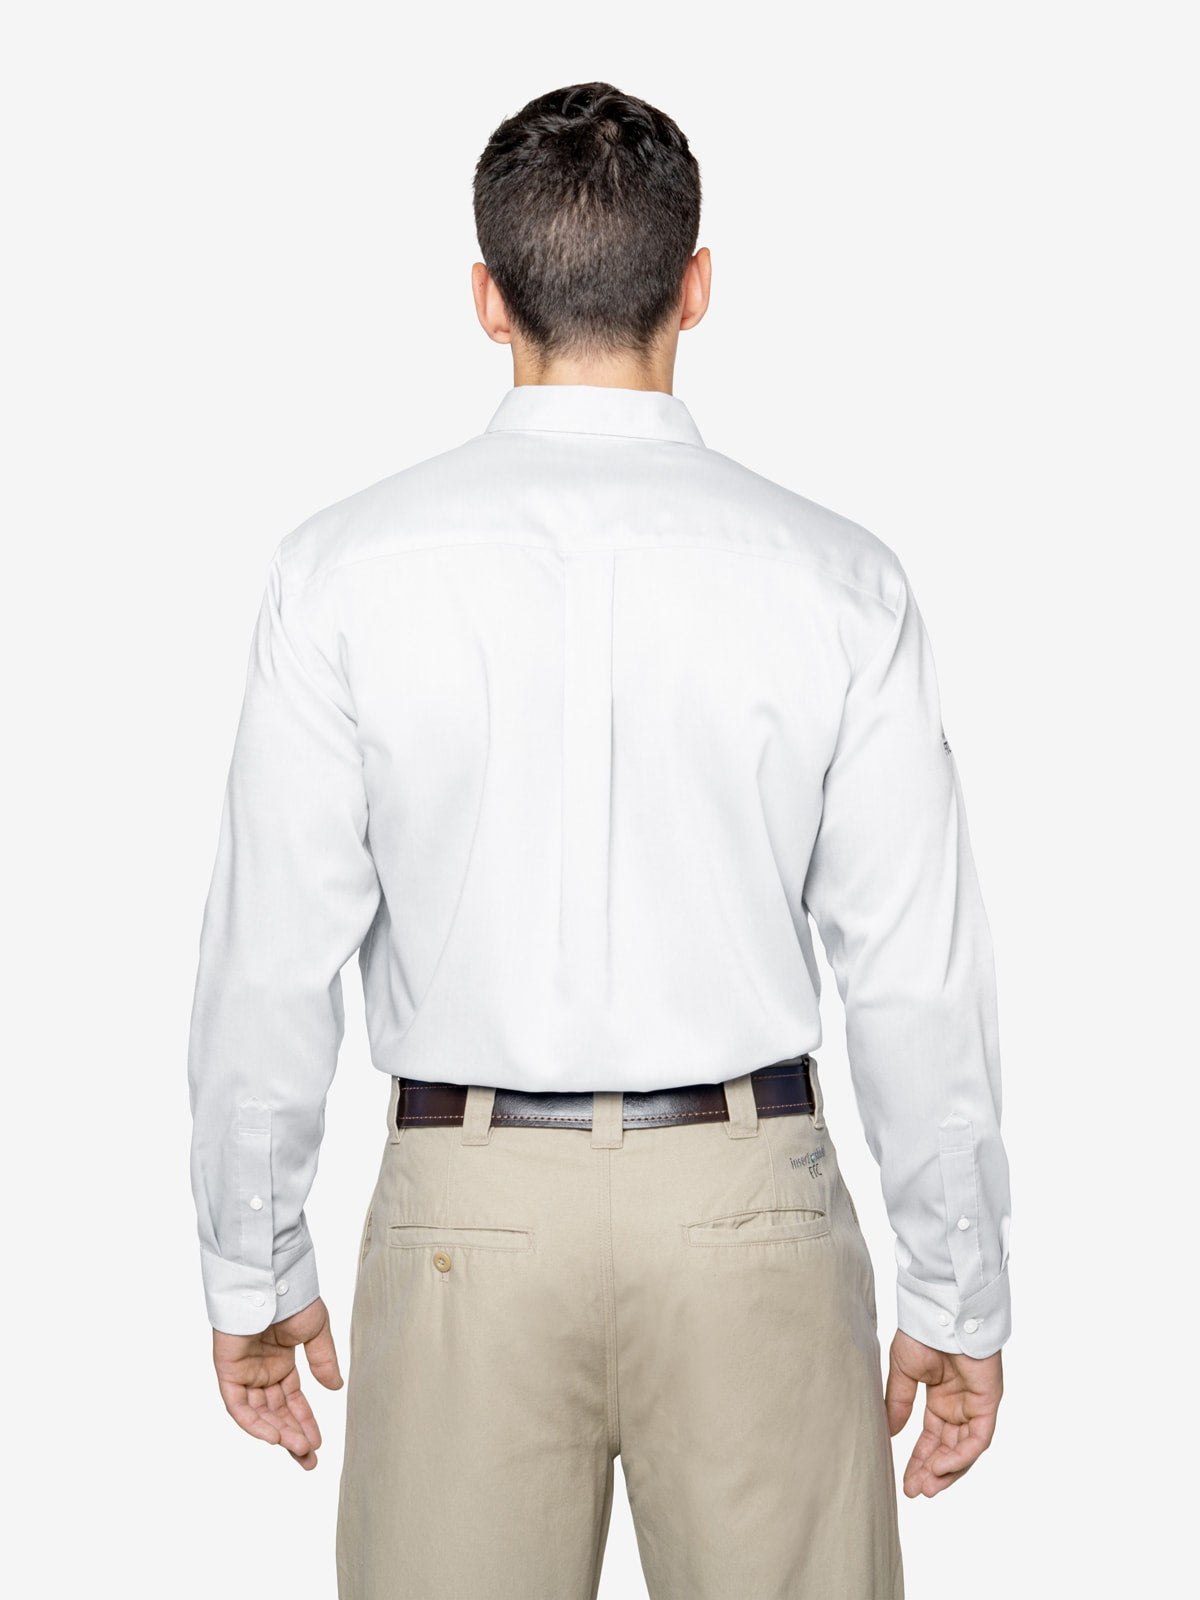 Insect Shield Men's Wrinkle-Resistant Oxford Shirt